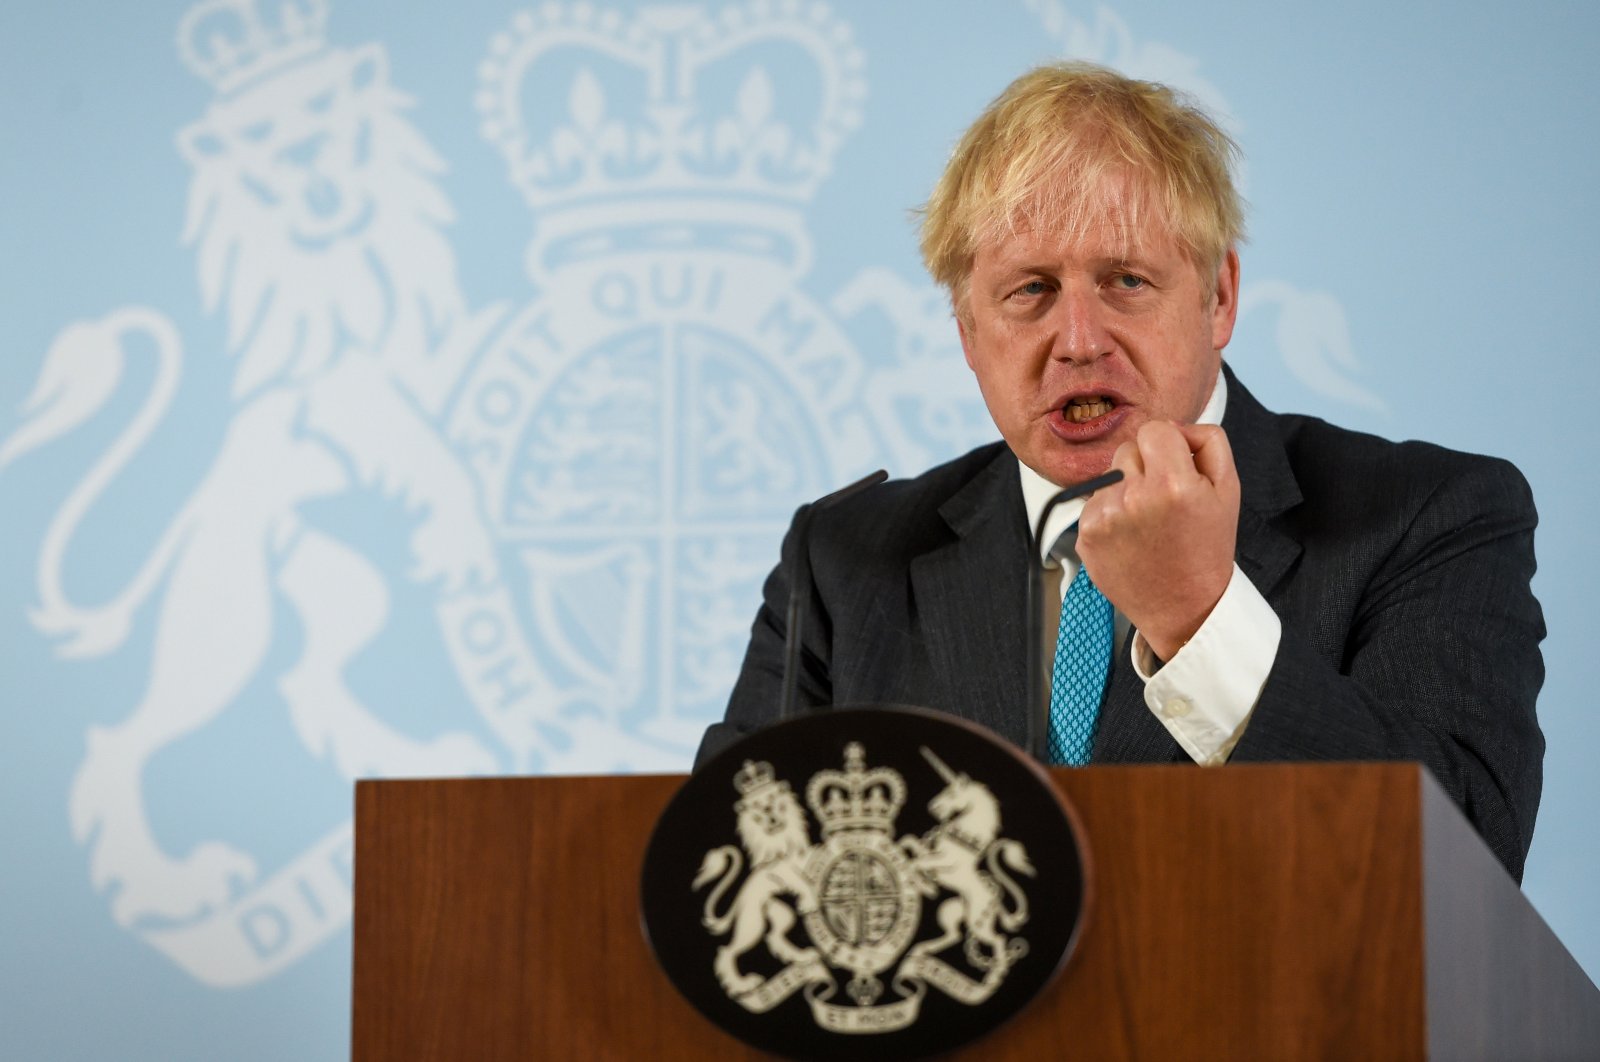 British Prime Minister Boris Johnson delivers a speech at Exeter College Construction Centre, part of Exeter College in Exeter, Britain Sept. 29, 2020. (Reuters Photo)